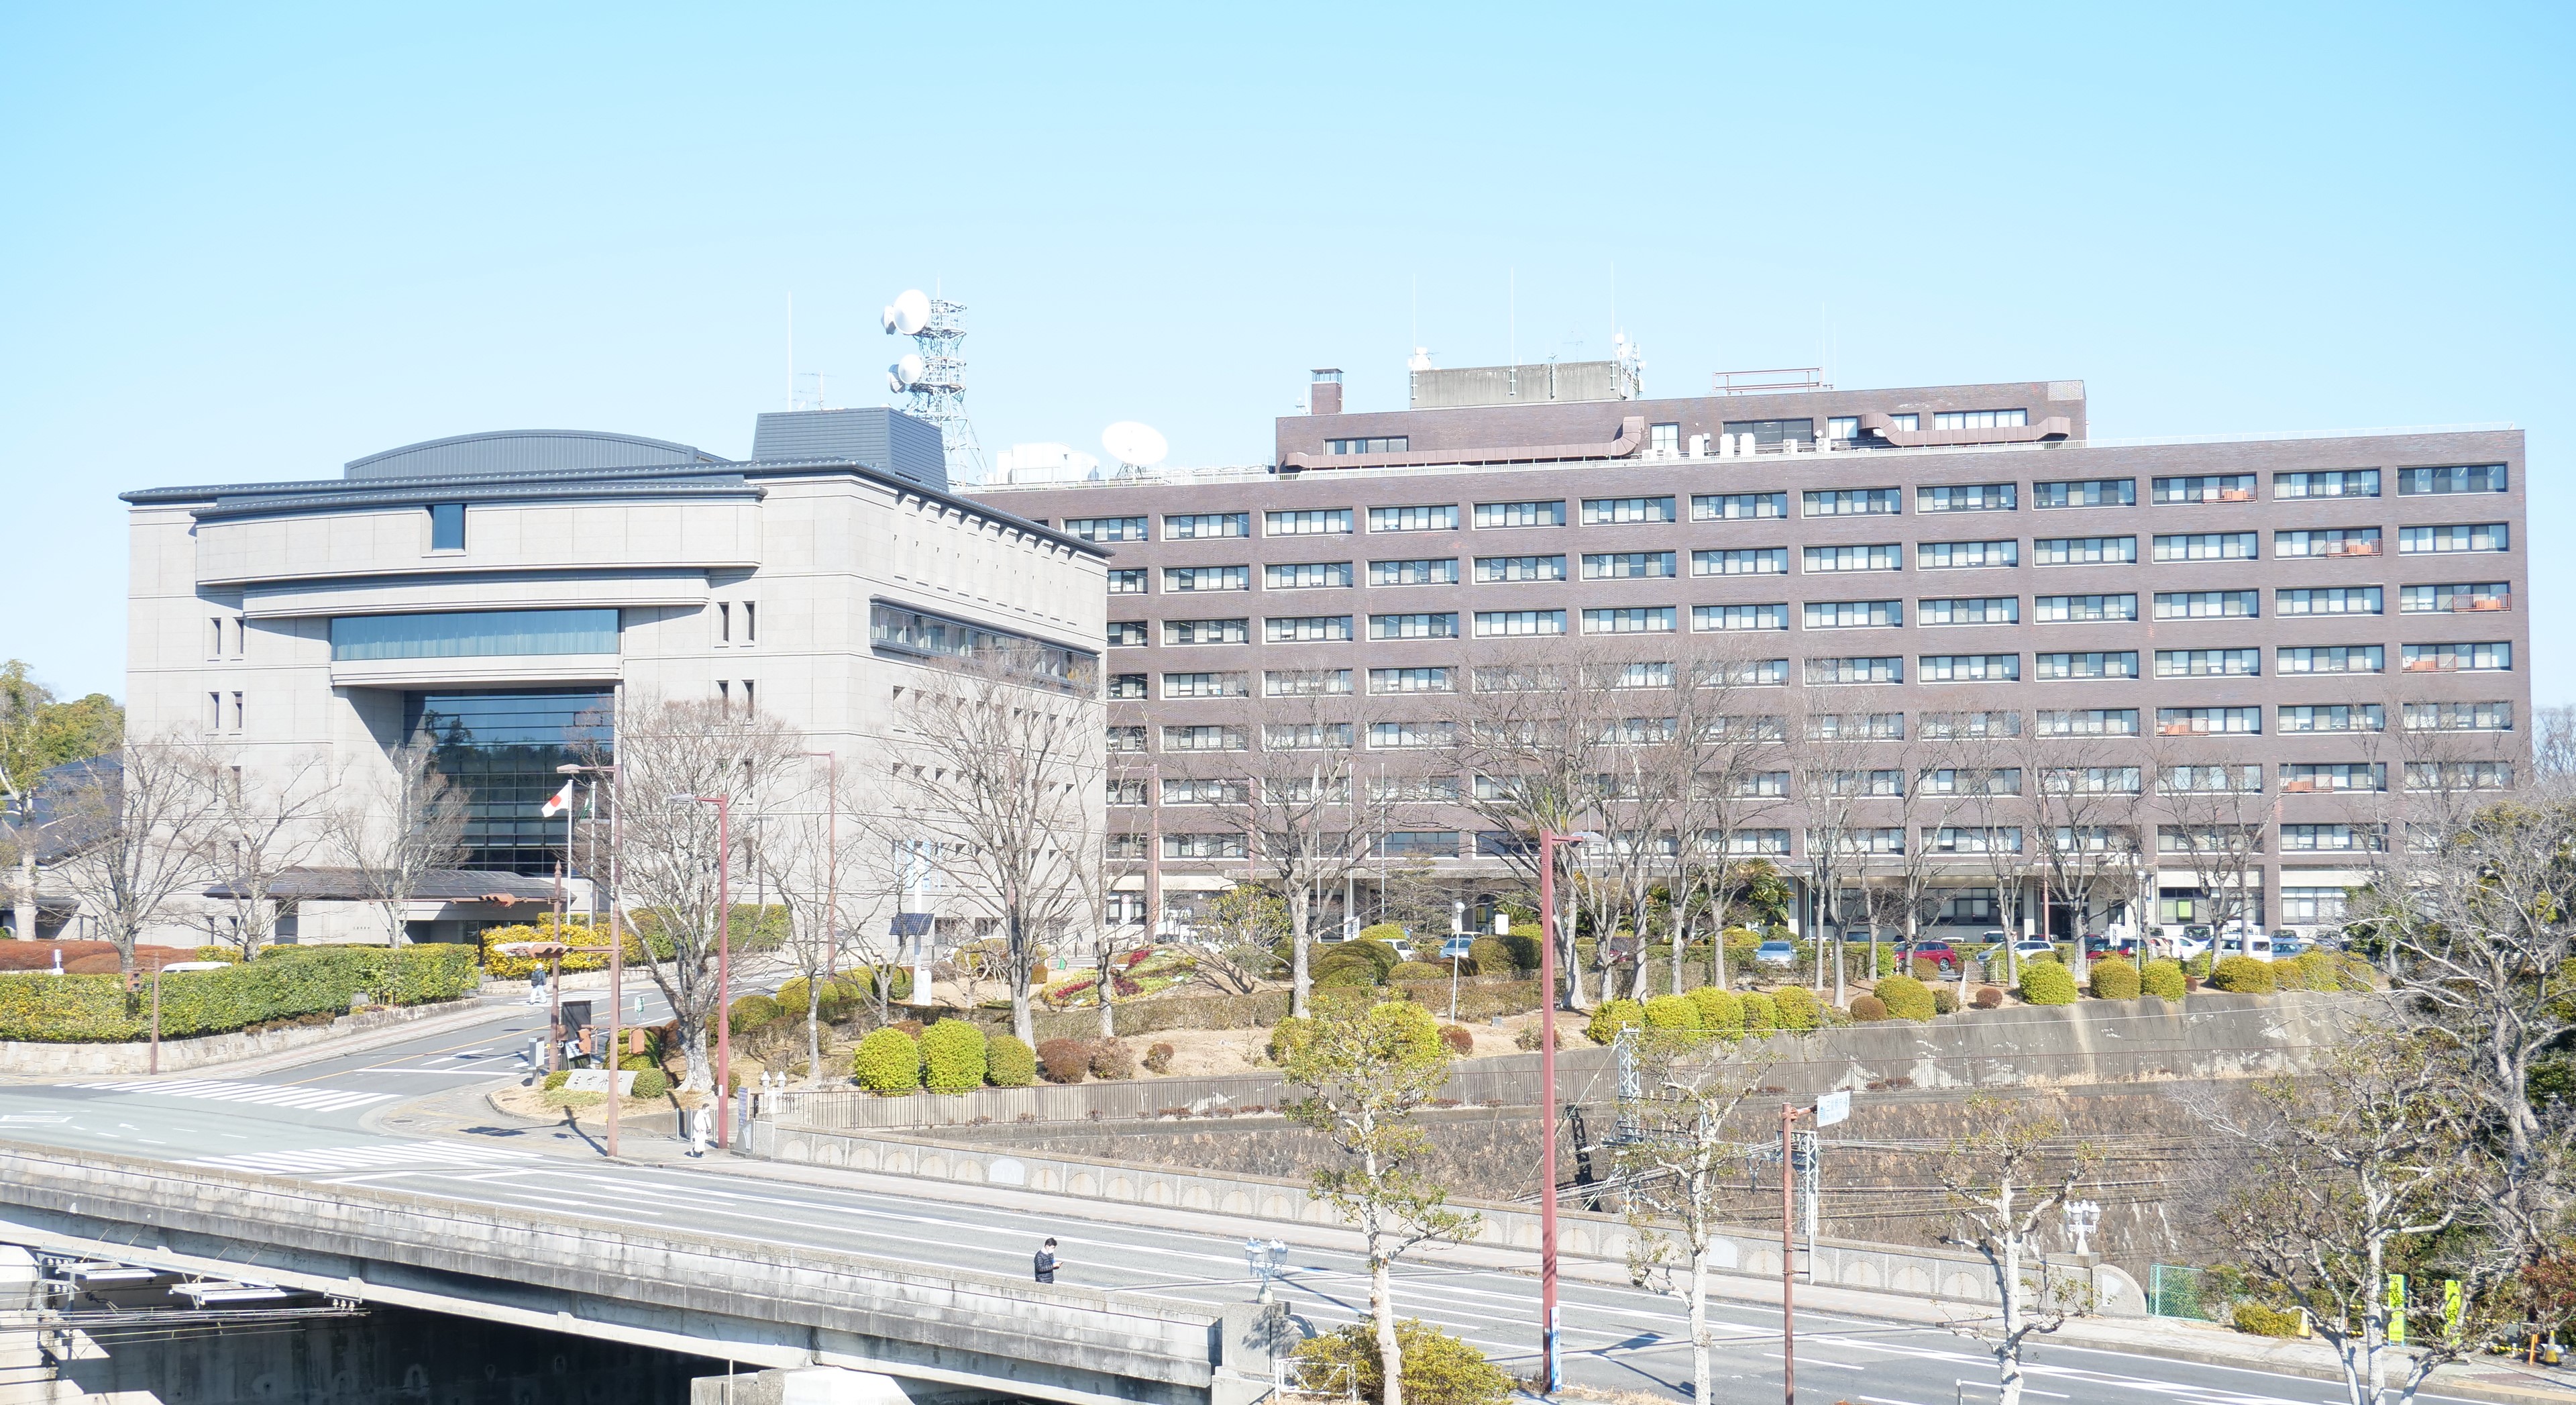 Mie Prefectural Government Office and Mie Prefectural Assembly Building